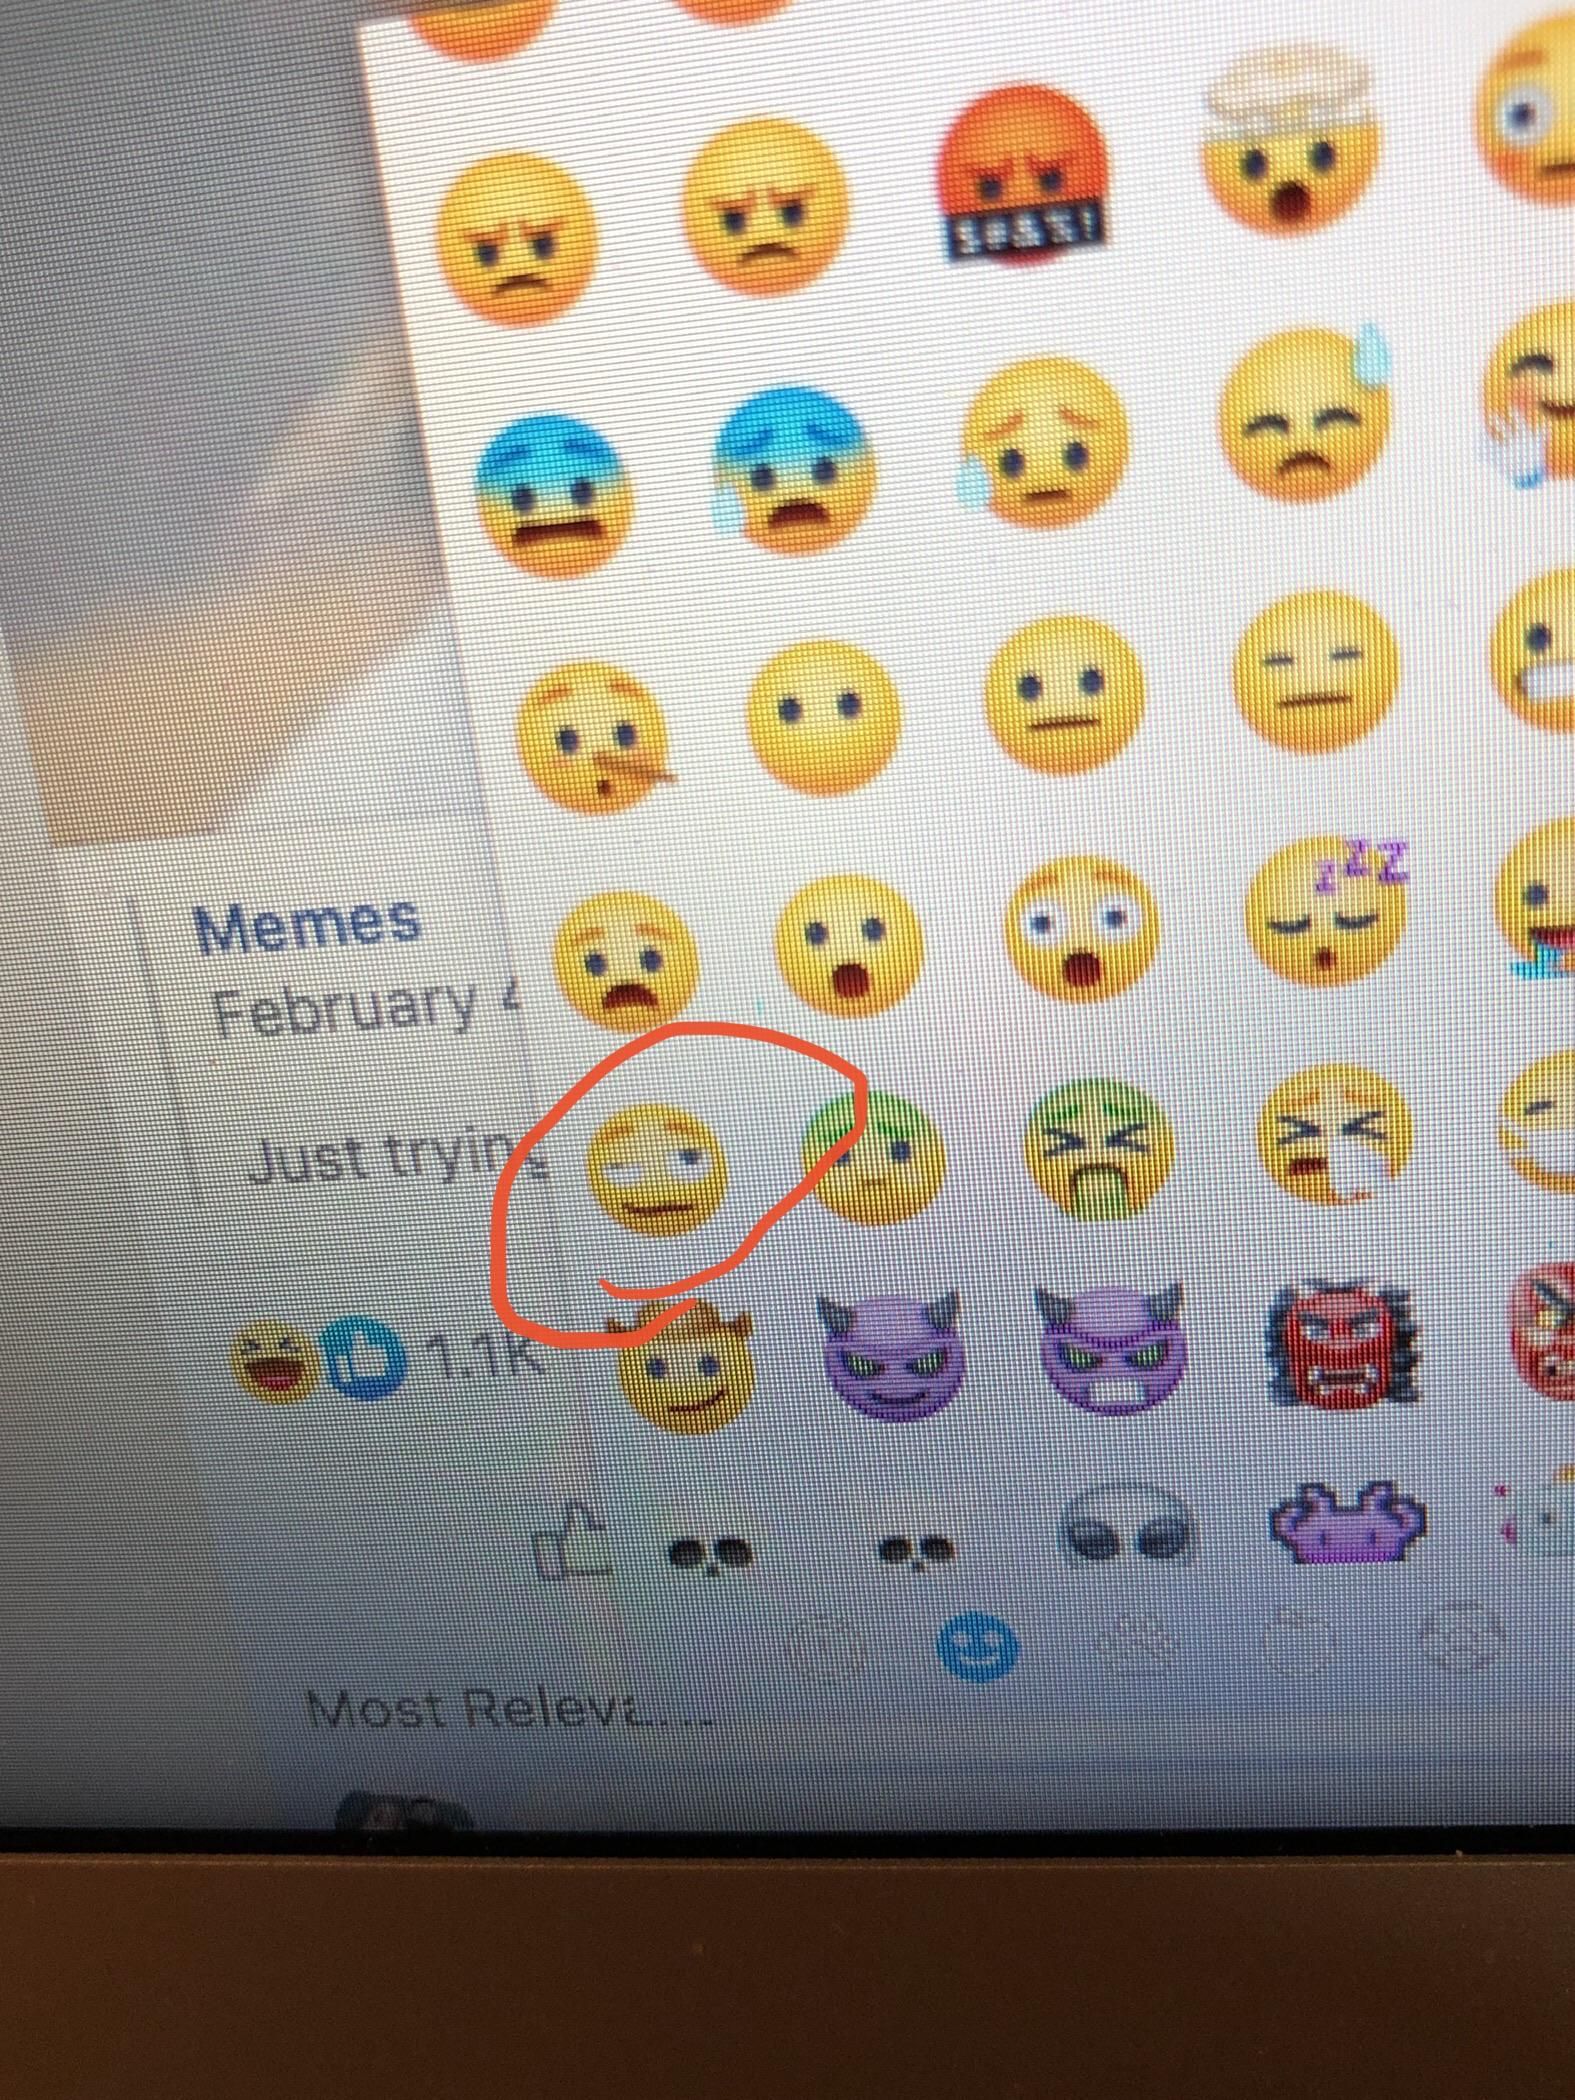 Anyone else notice Facebook has an “I just came” emoji?